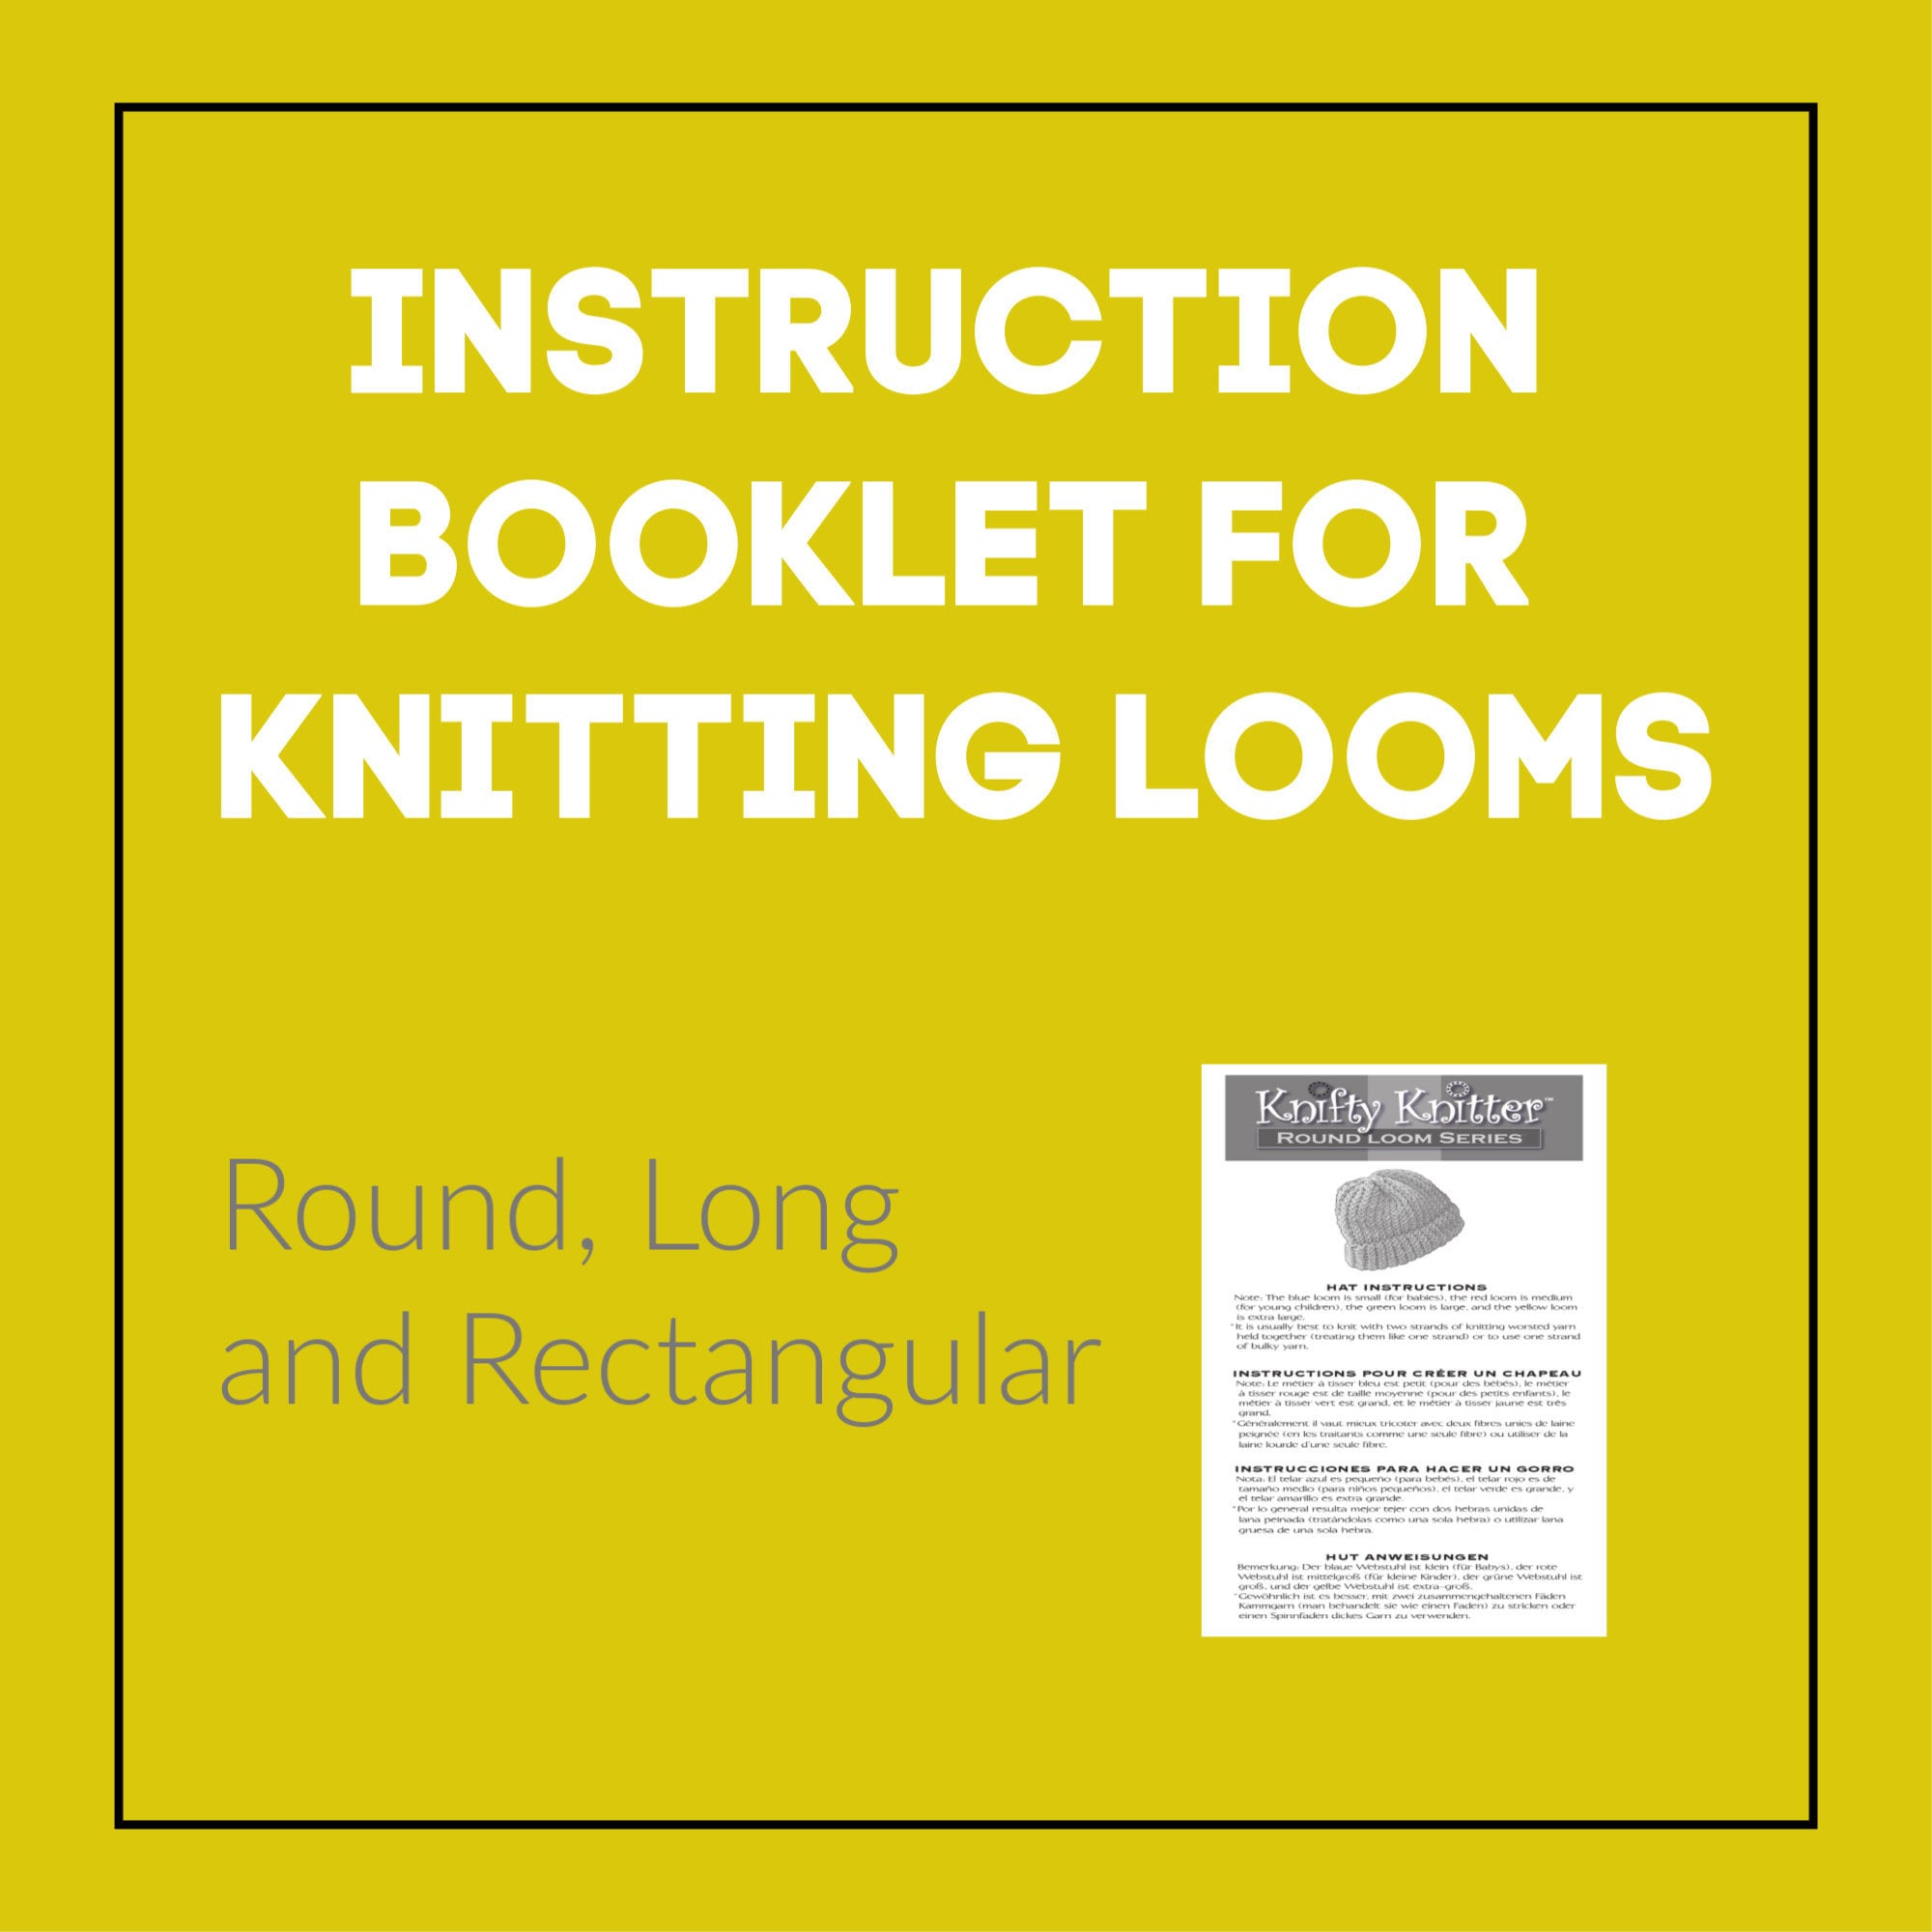 LOOM KNITTING BOOK FOR BEGINNERS: Ultimate loom knitting instructional book  with pictorial illustrations See more